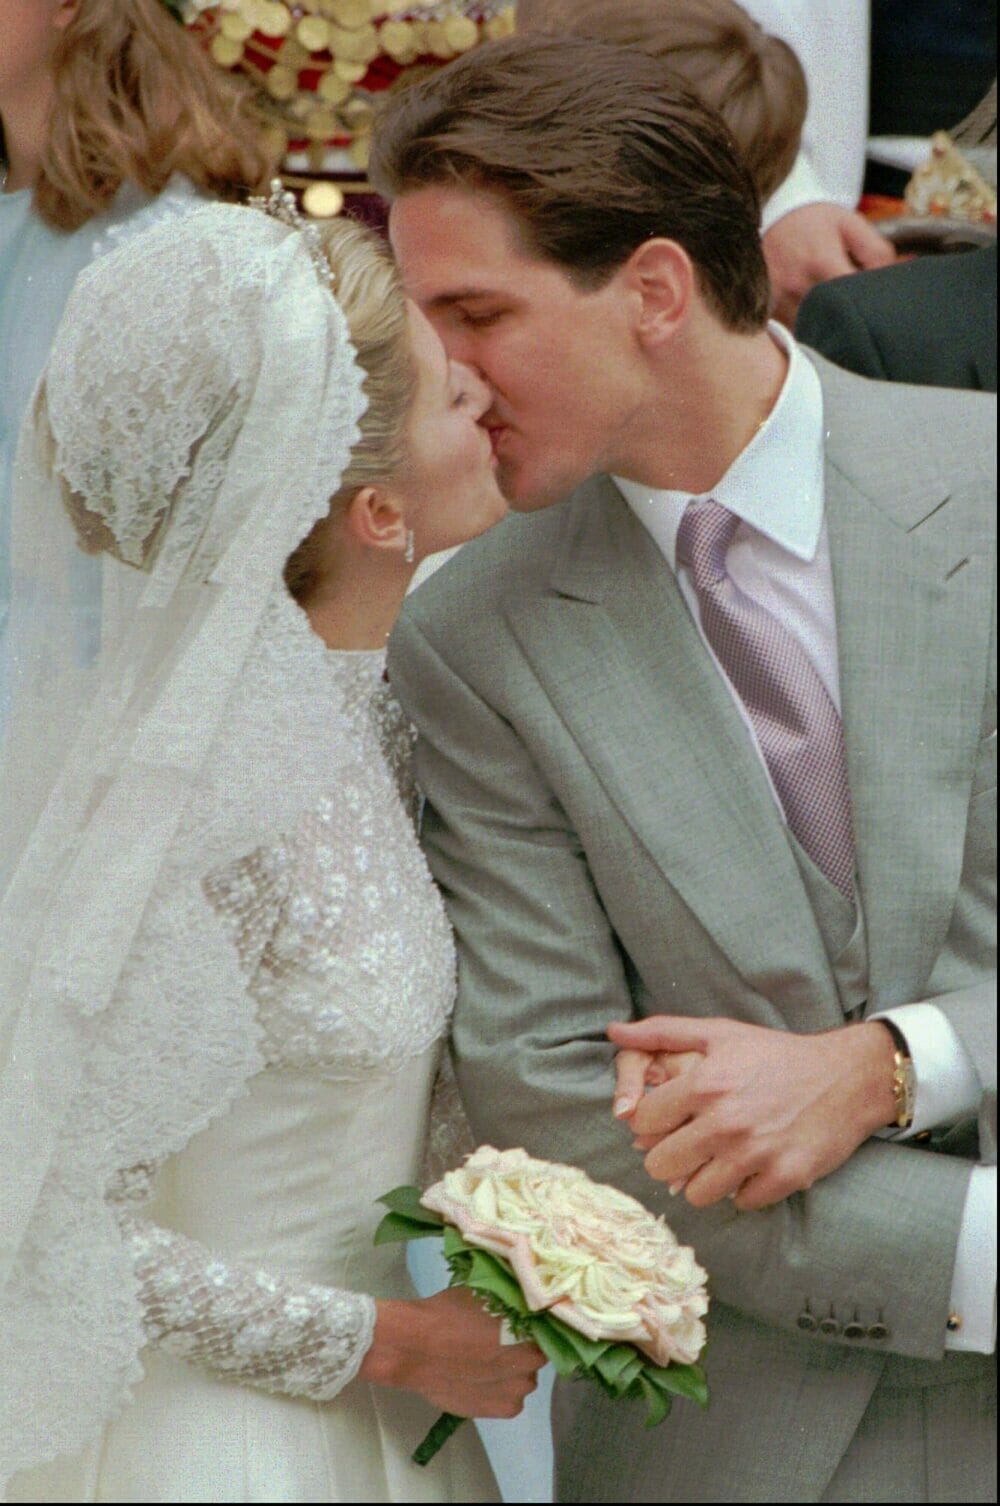 Crown Prince Pavlos of Greece kisses his new bride Marie-Chantal following their wedding at the Greek Cathedral in London, Saturday, July 1, 1995.